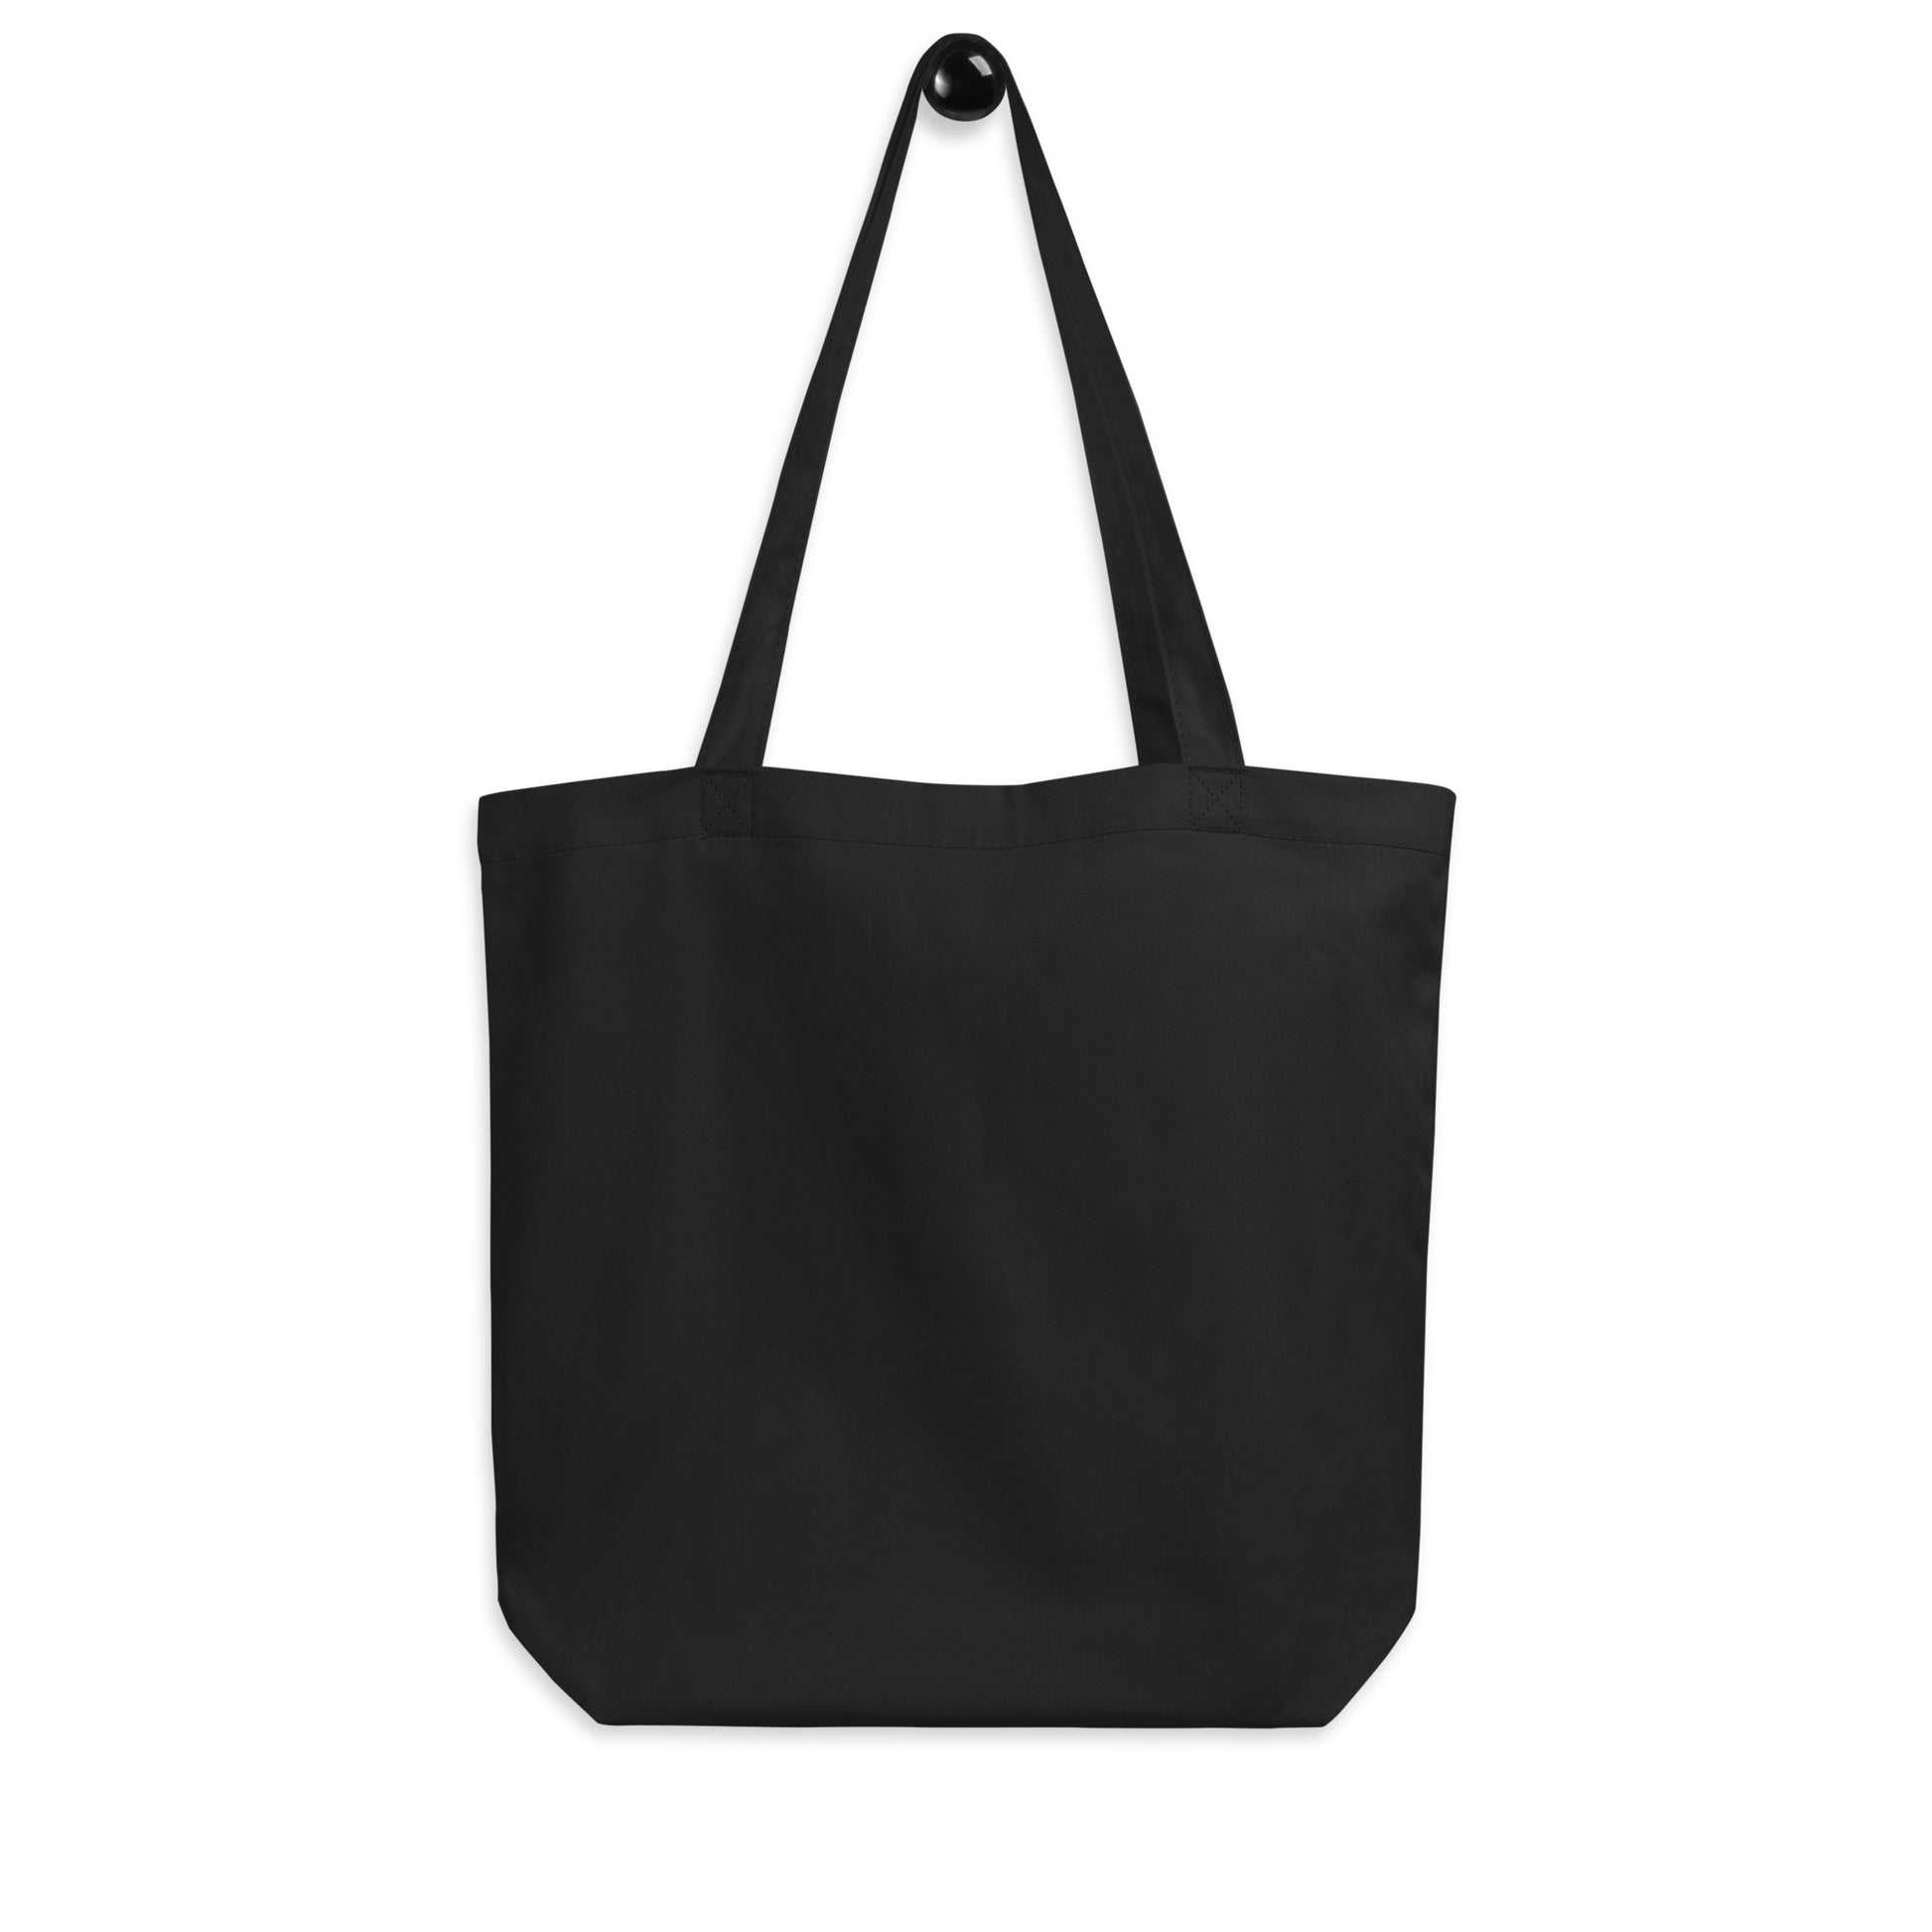 Unique Travel Gift Organic Tote - White Oval • HND Tokyo • YHM Designs - Image 05